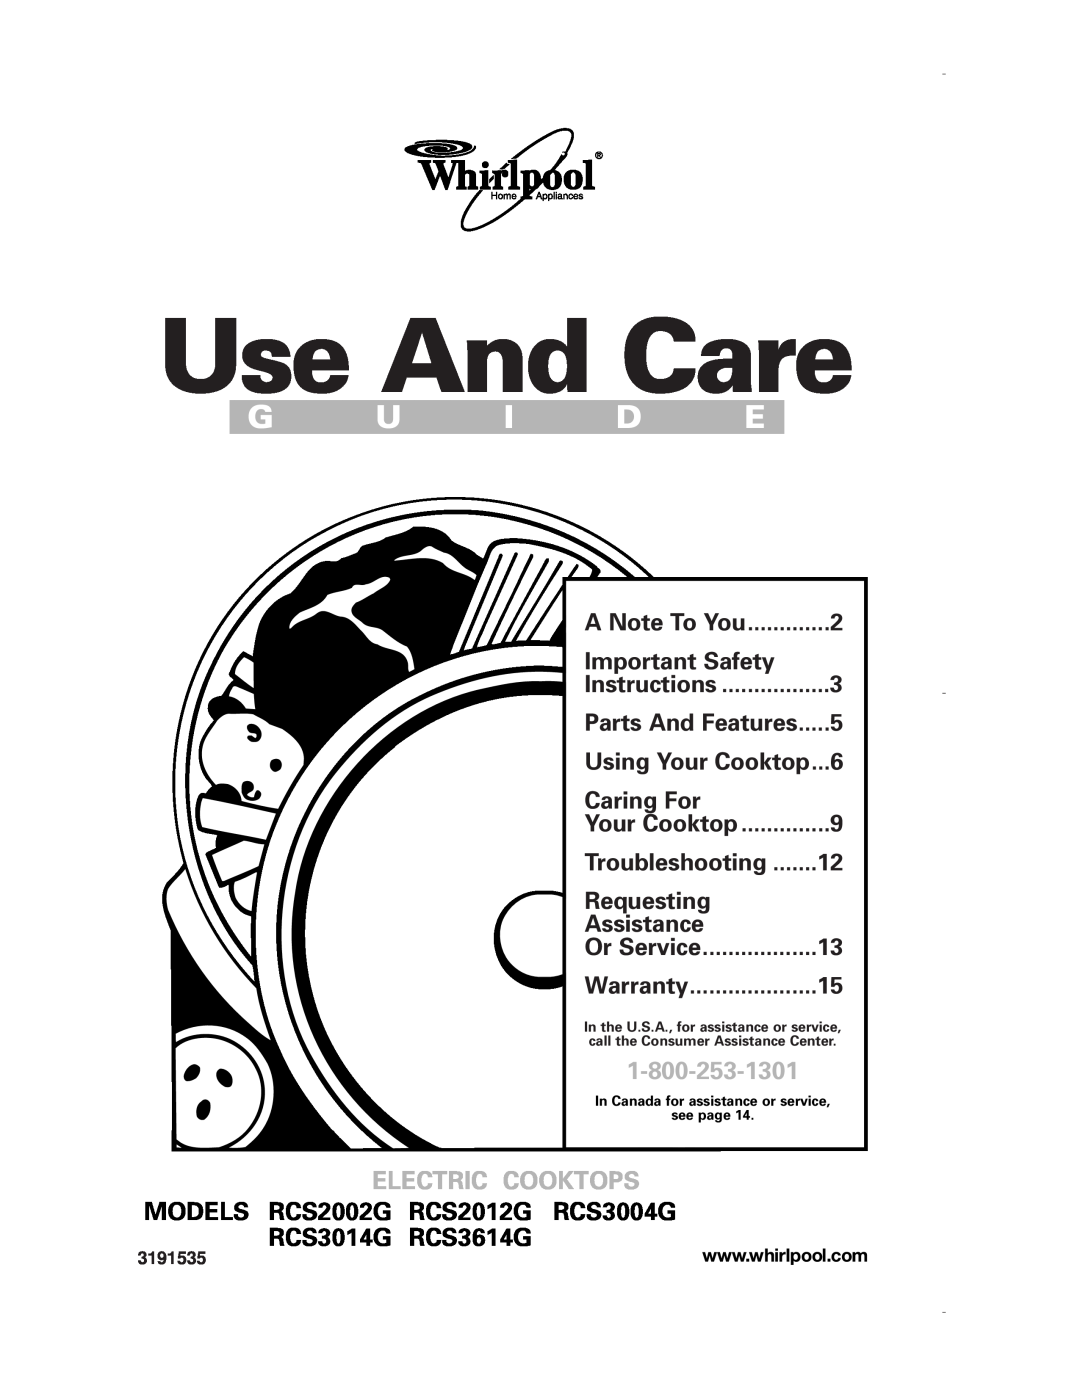 Whirlpool RCS2012G important safety instructions G U I D E, Electric Cooktops, A Note To You, Instructions, Your Cooktop 